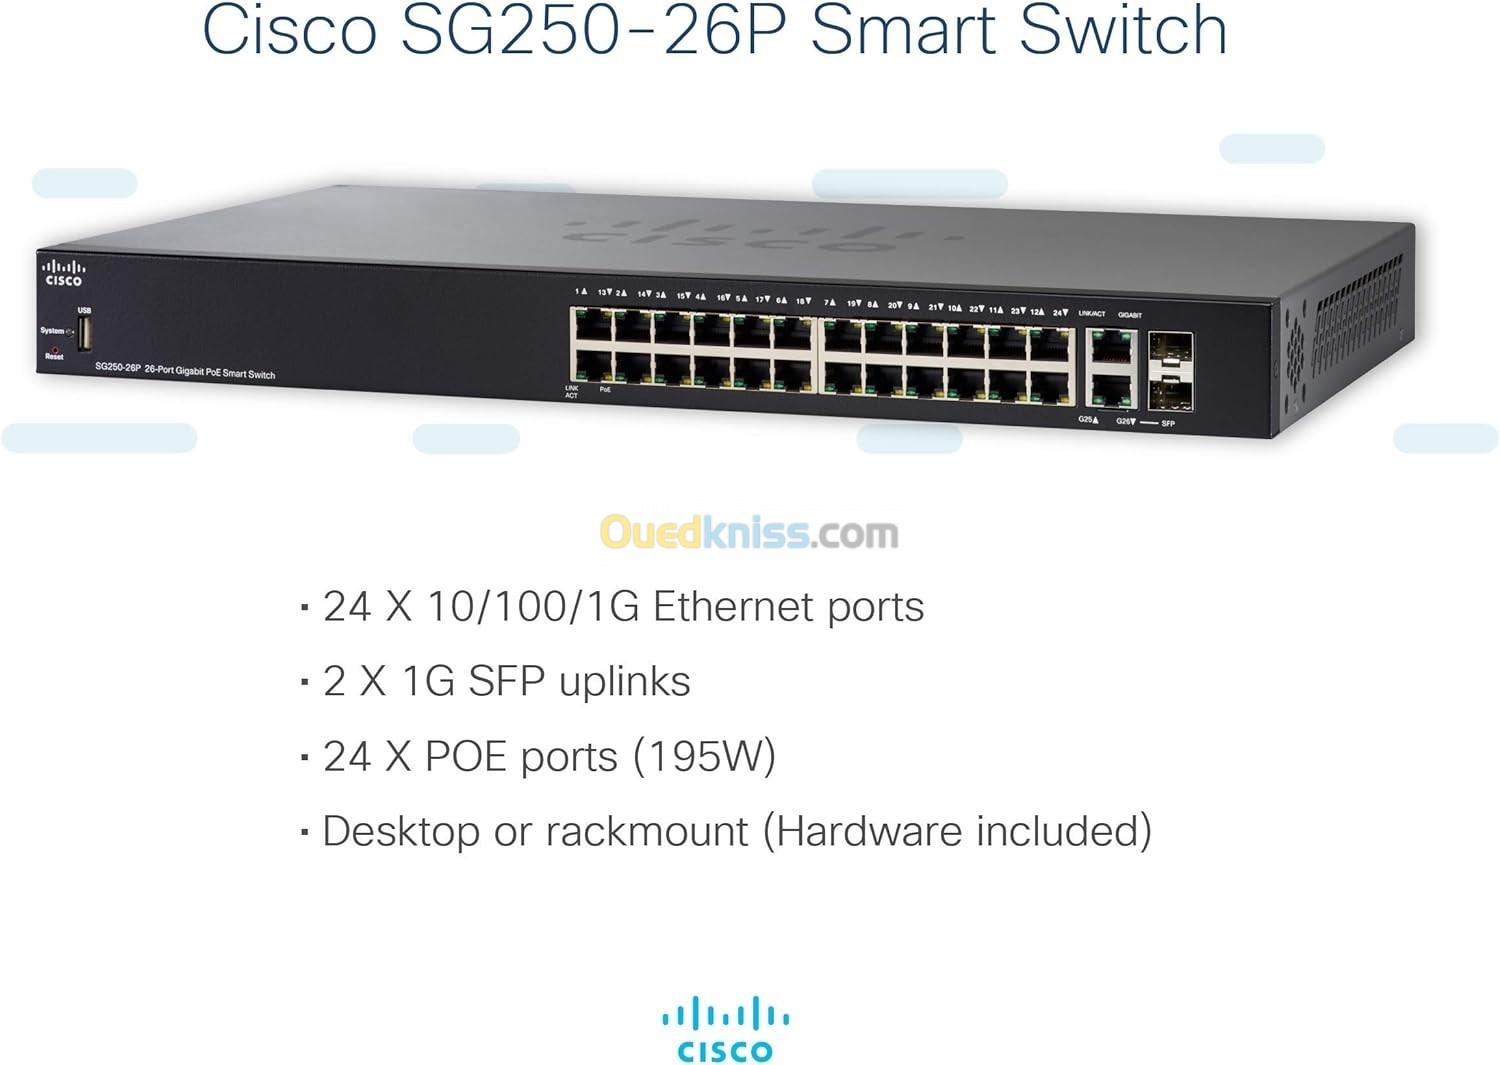 Cisco SG250-26P (Giga + Poe + L3 static routing) Neuf Sous emballage